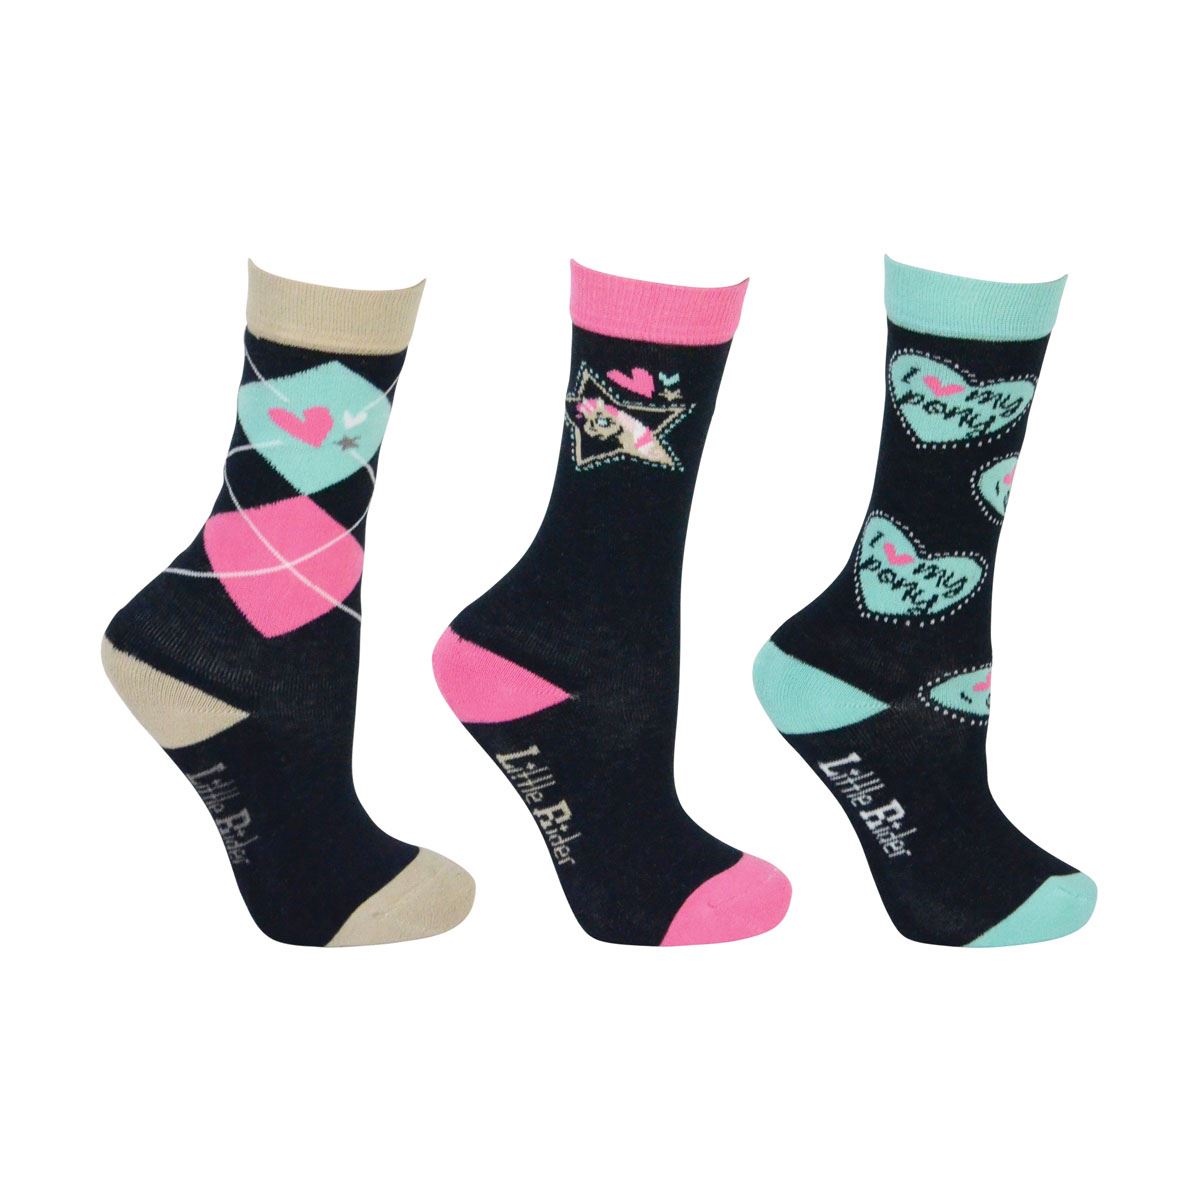 I Love My Pony Collection Socks by Little Rider (Pack of 3) - Just Horse Riders